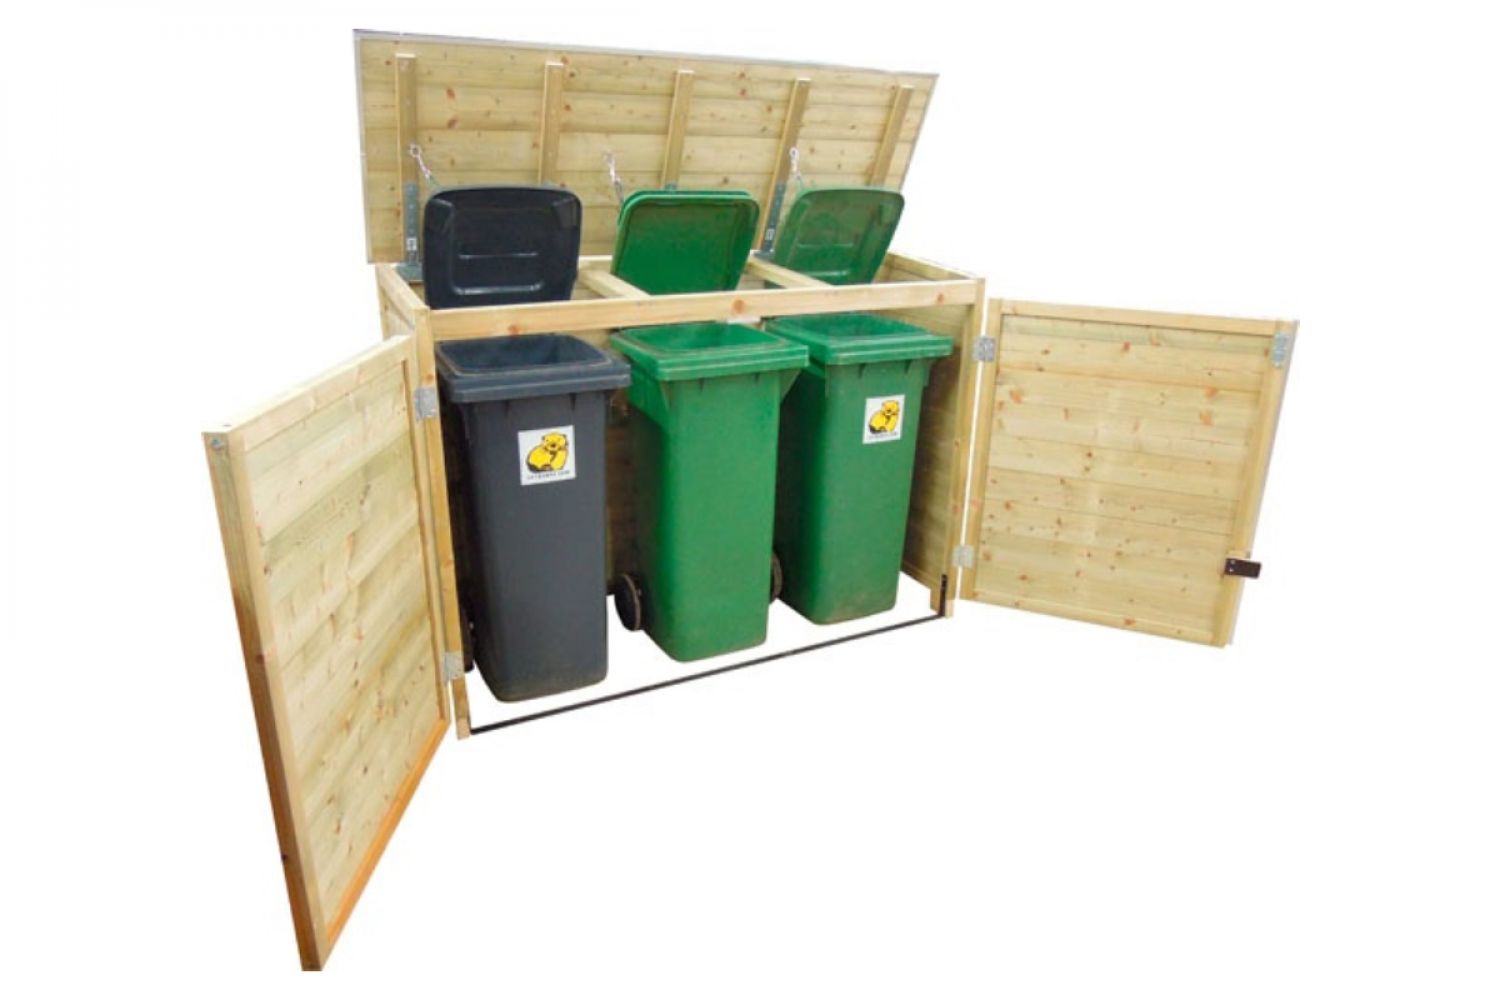 Containerberging 2x 140L en 1x 240L | 187x90x125 cm - voor 3 containers!